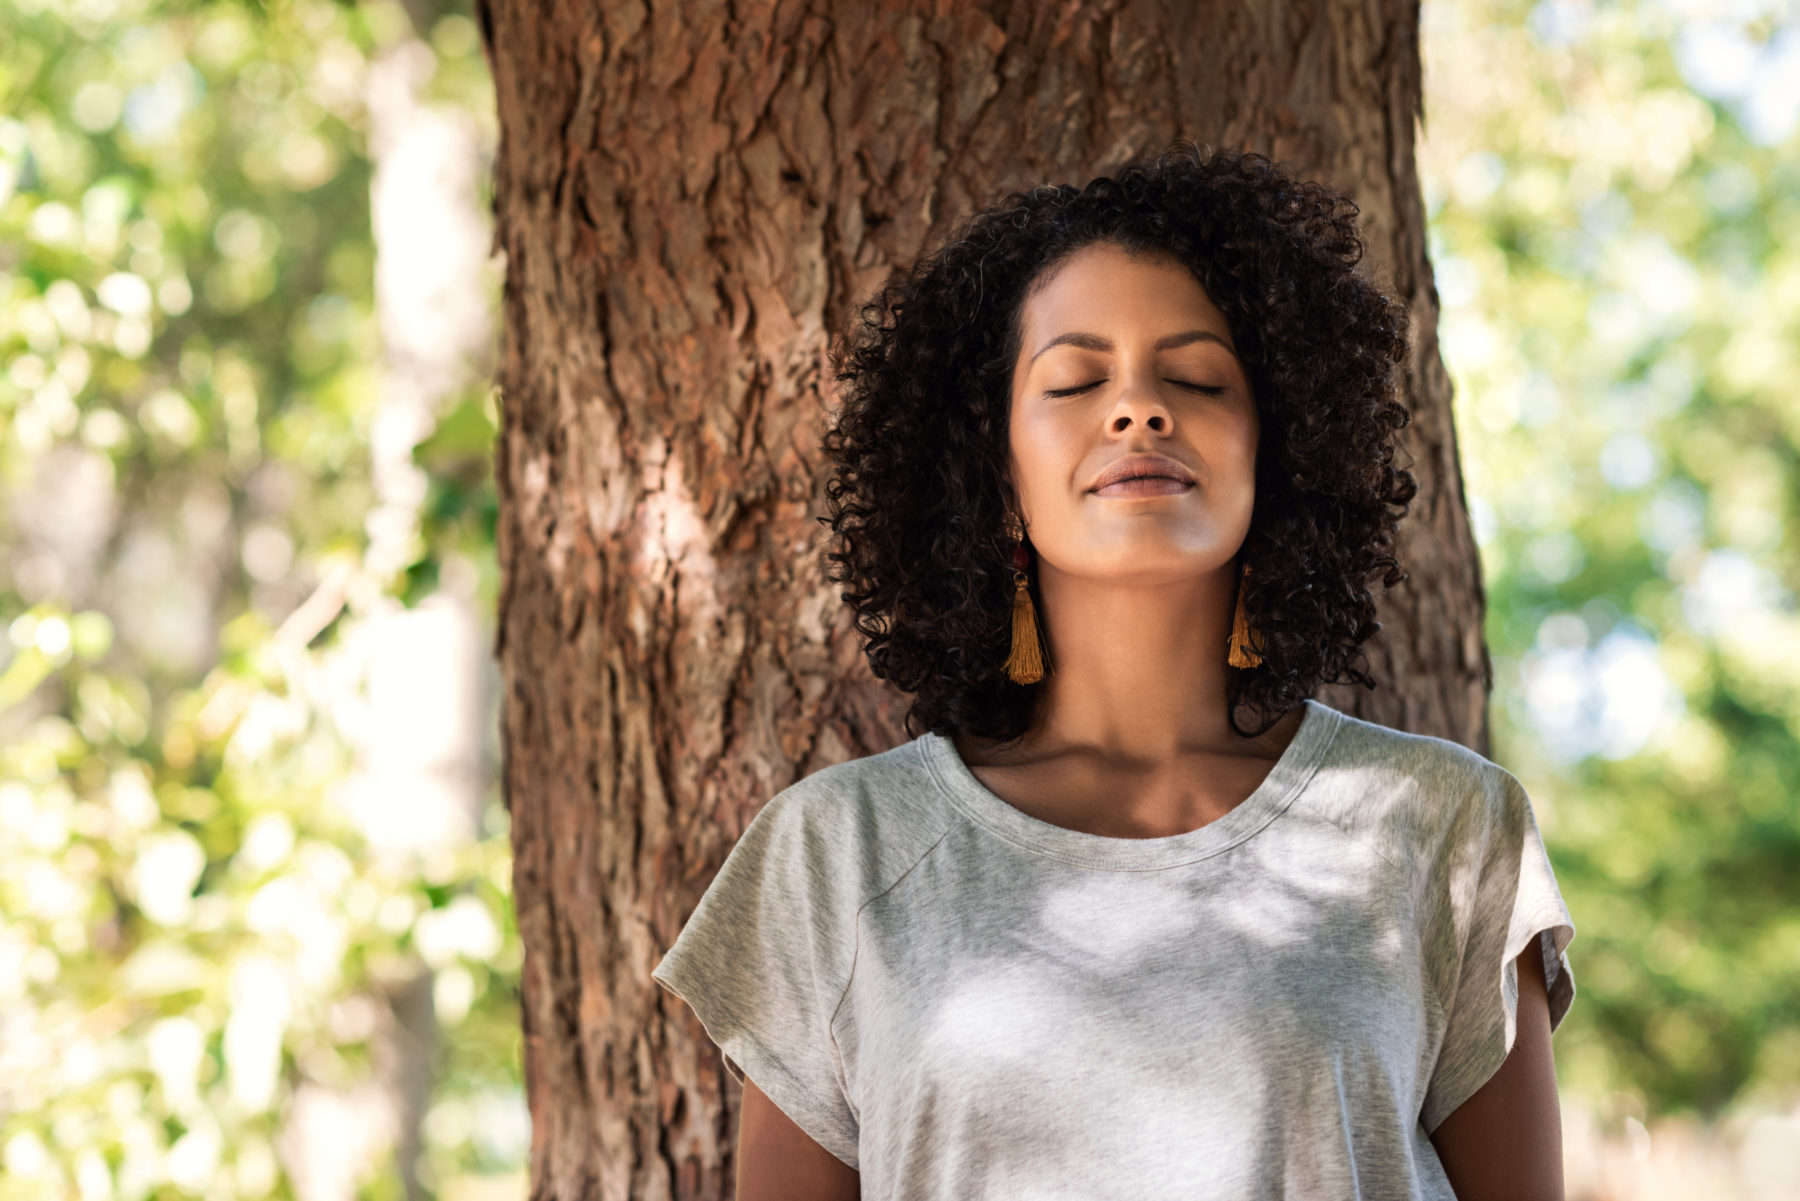 Peaceful young woman with curly hair leaning with her eyes closed against a tree trunk on a summer day